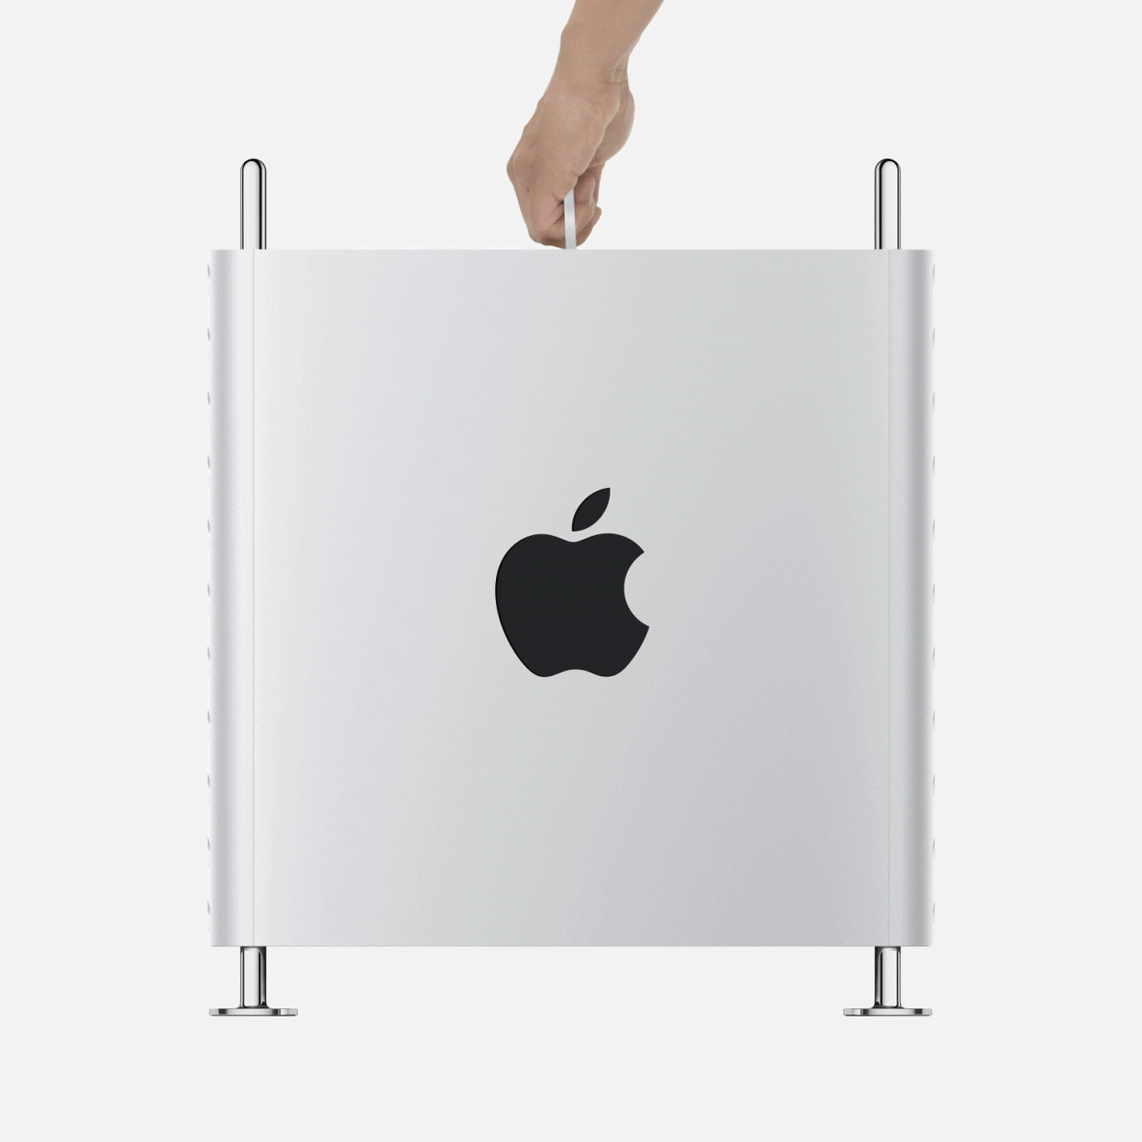 Animated GIF of the opening of the new Mac Pro